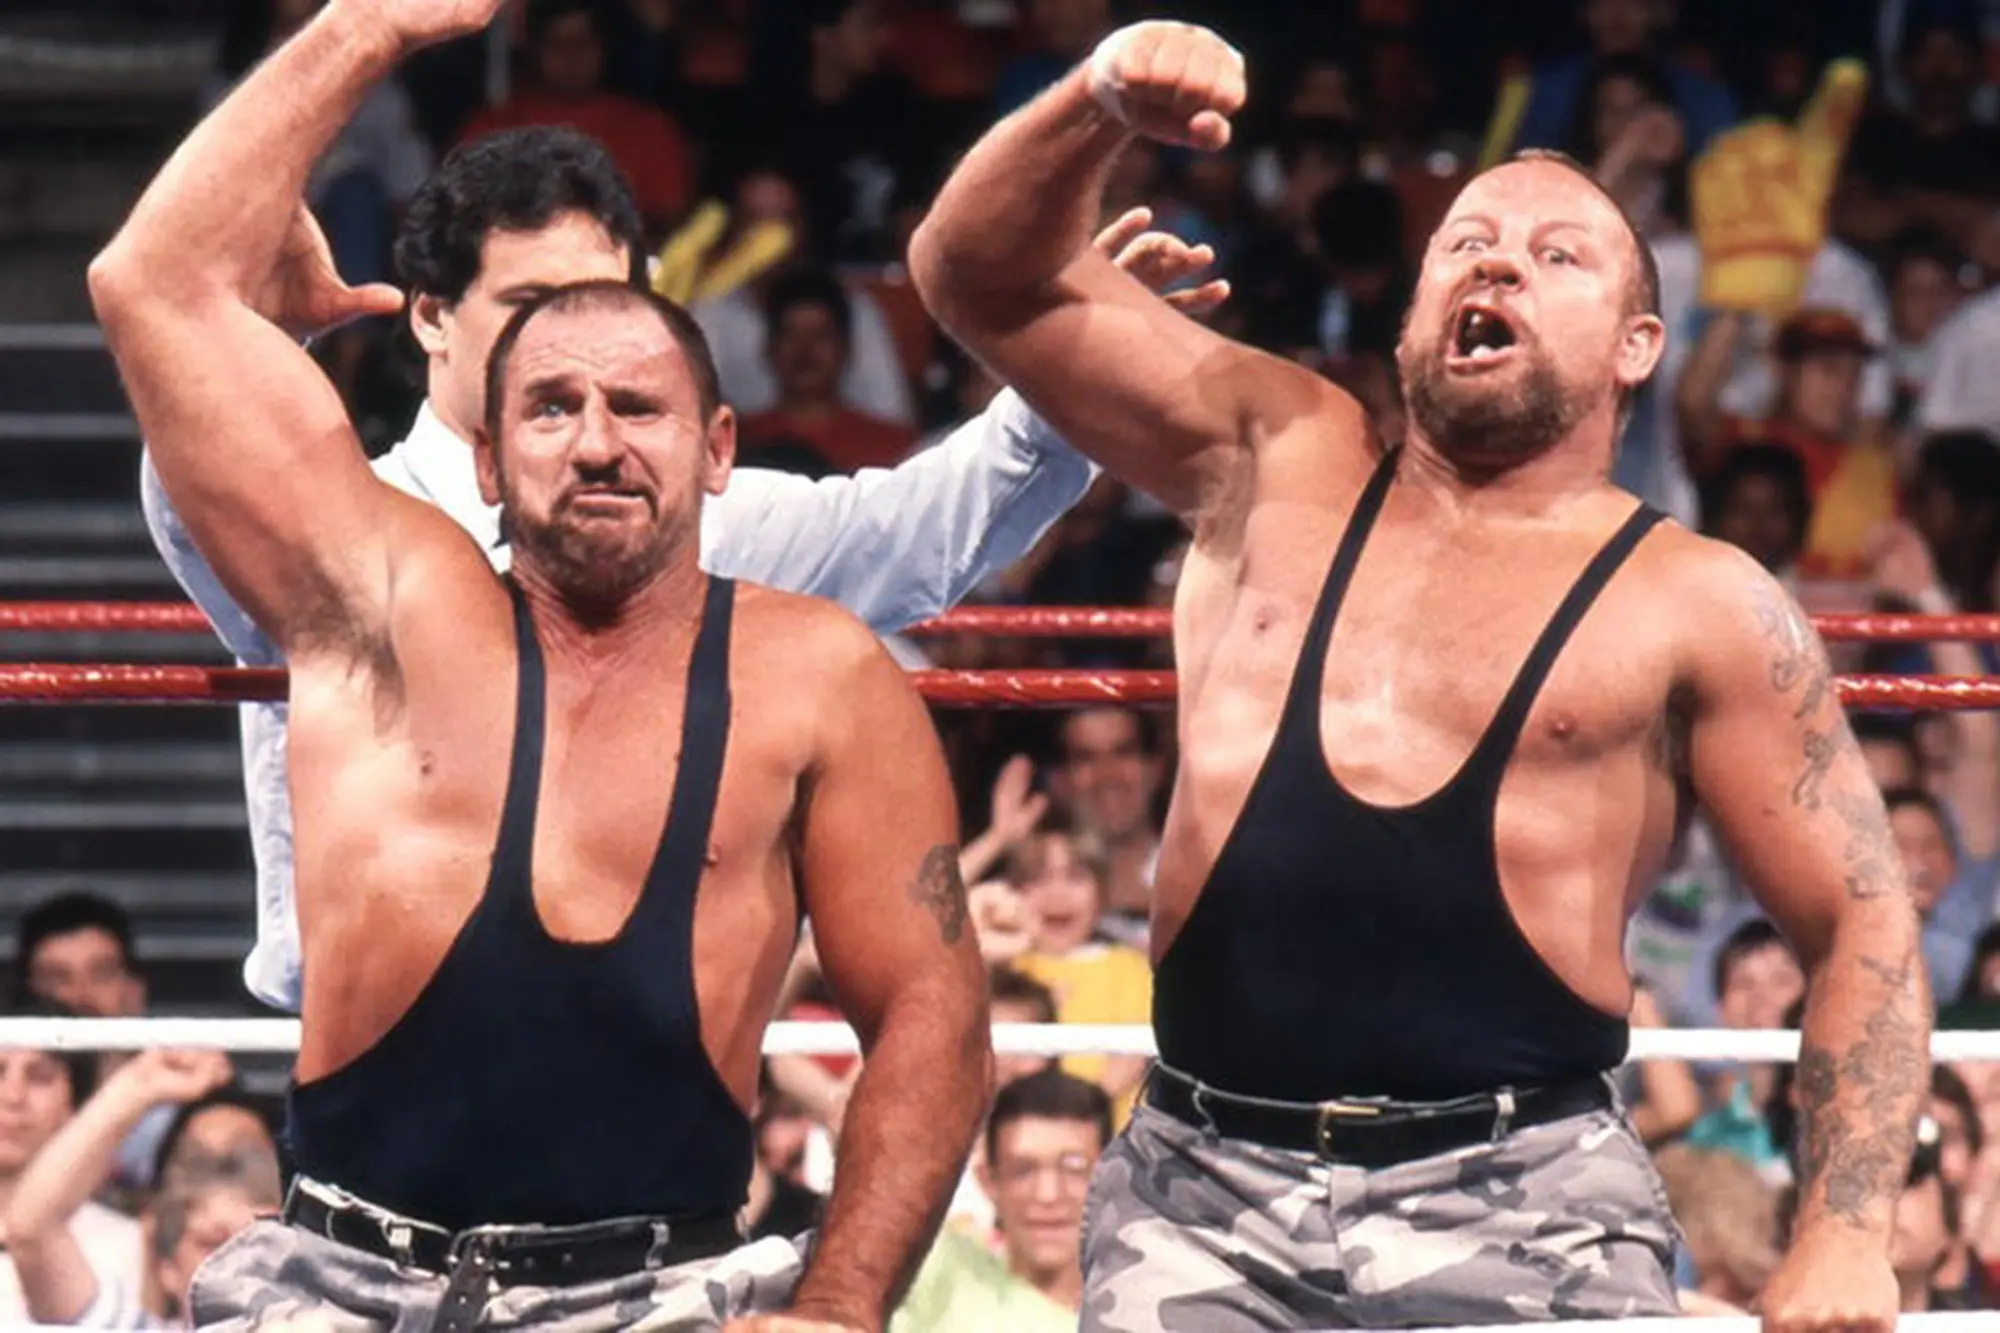 WWE Hall of Famer Bushwhacker Butch Dies at 78, Fans Pay Tribute to Pro Wrestler